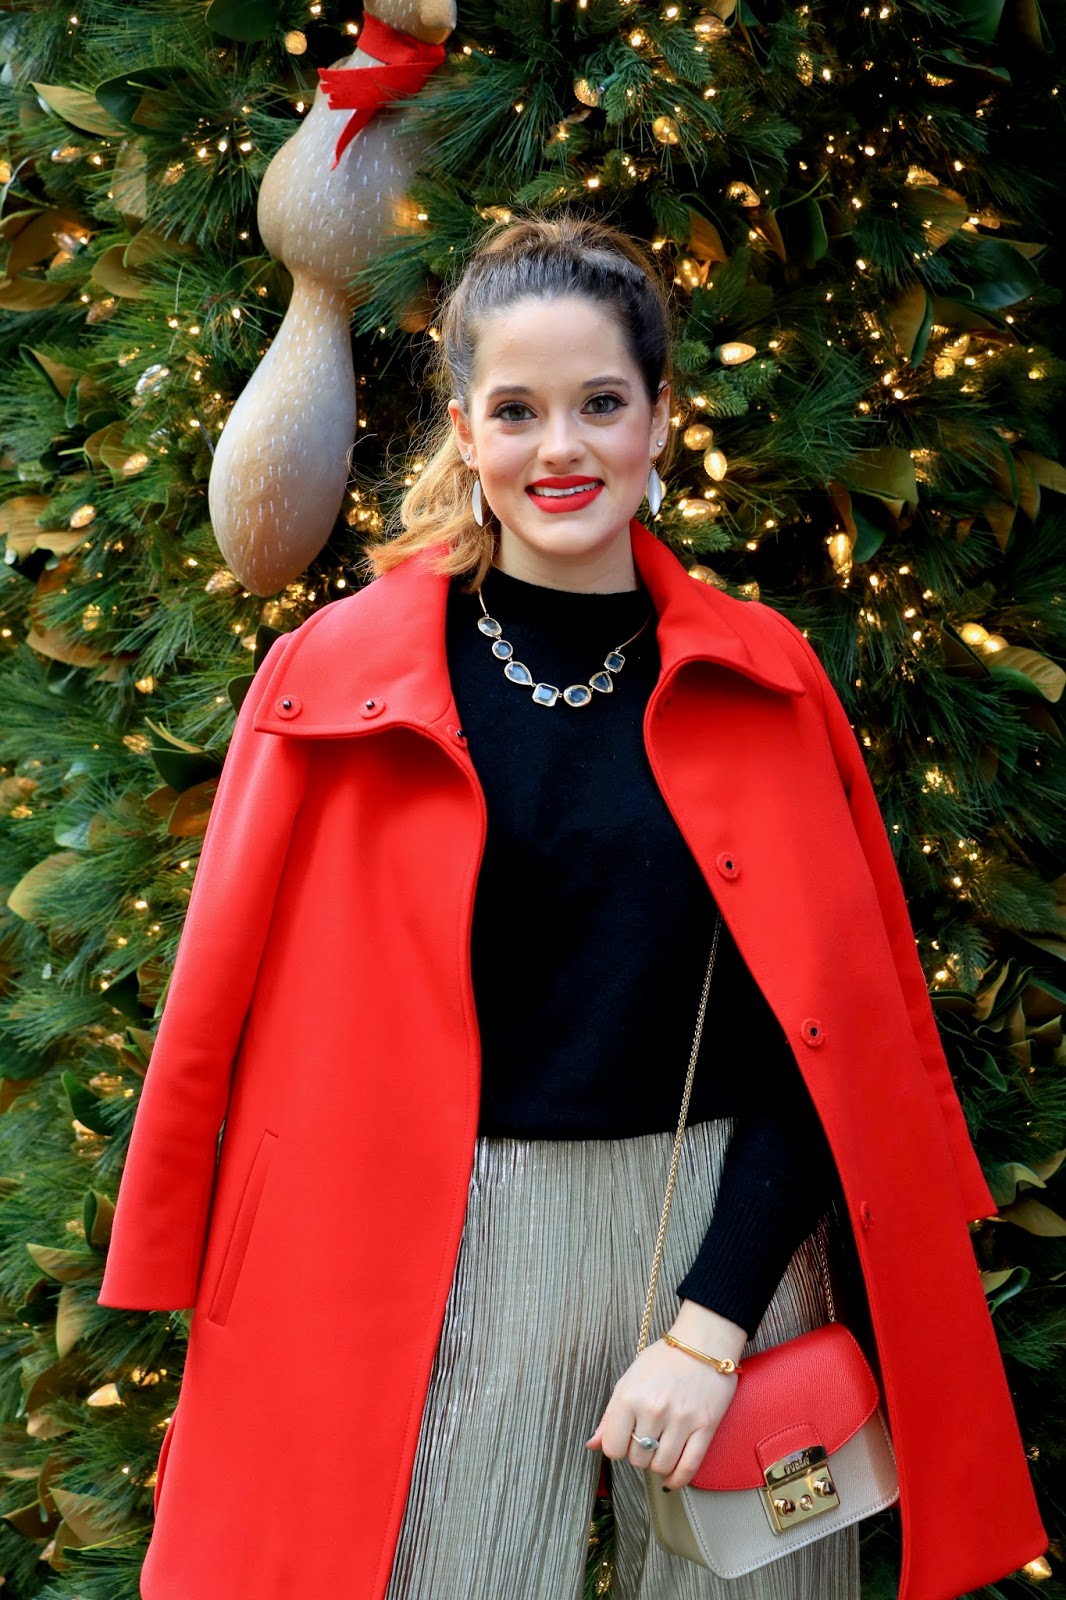 Nyc fashion blogger Kathleen Harper showing how to wear a red coat